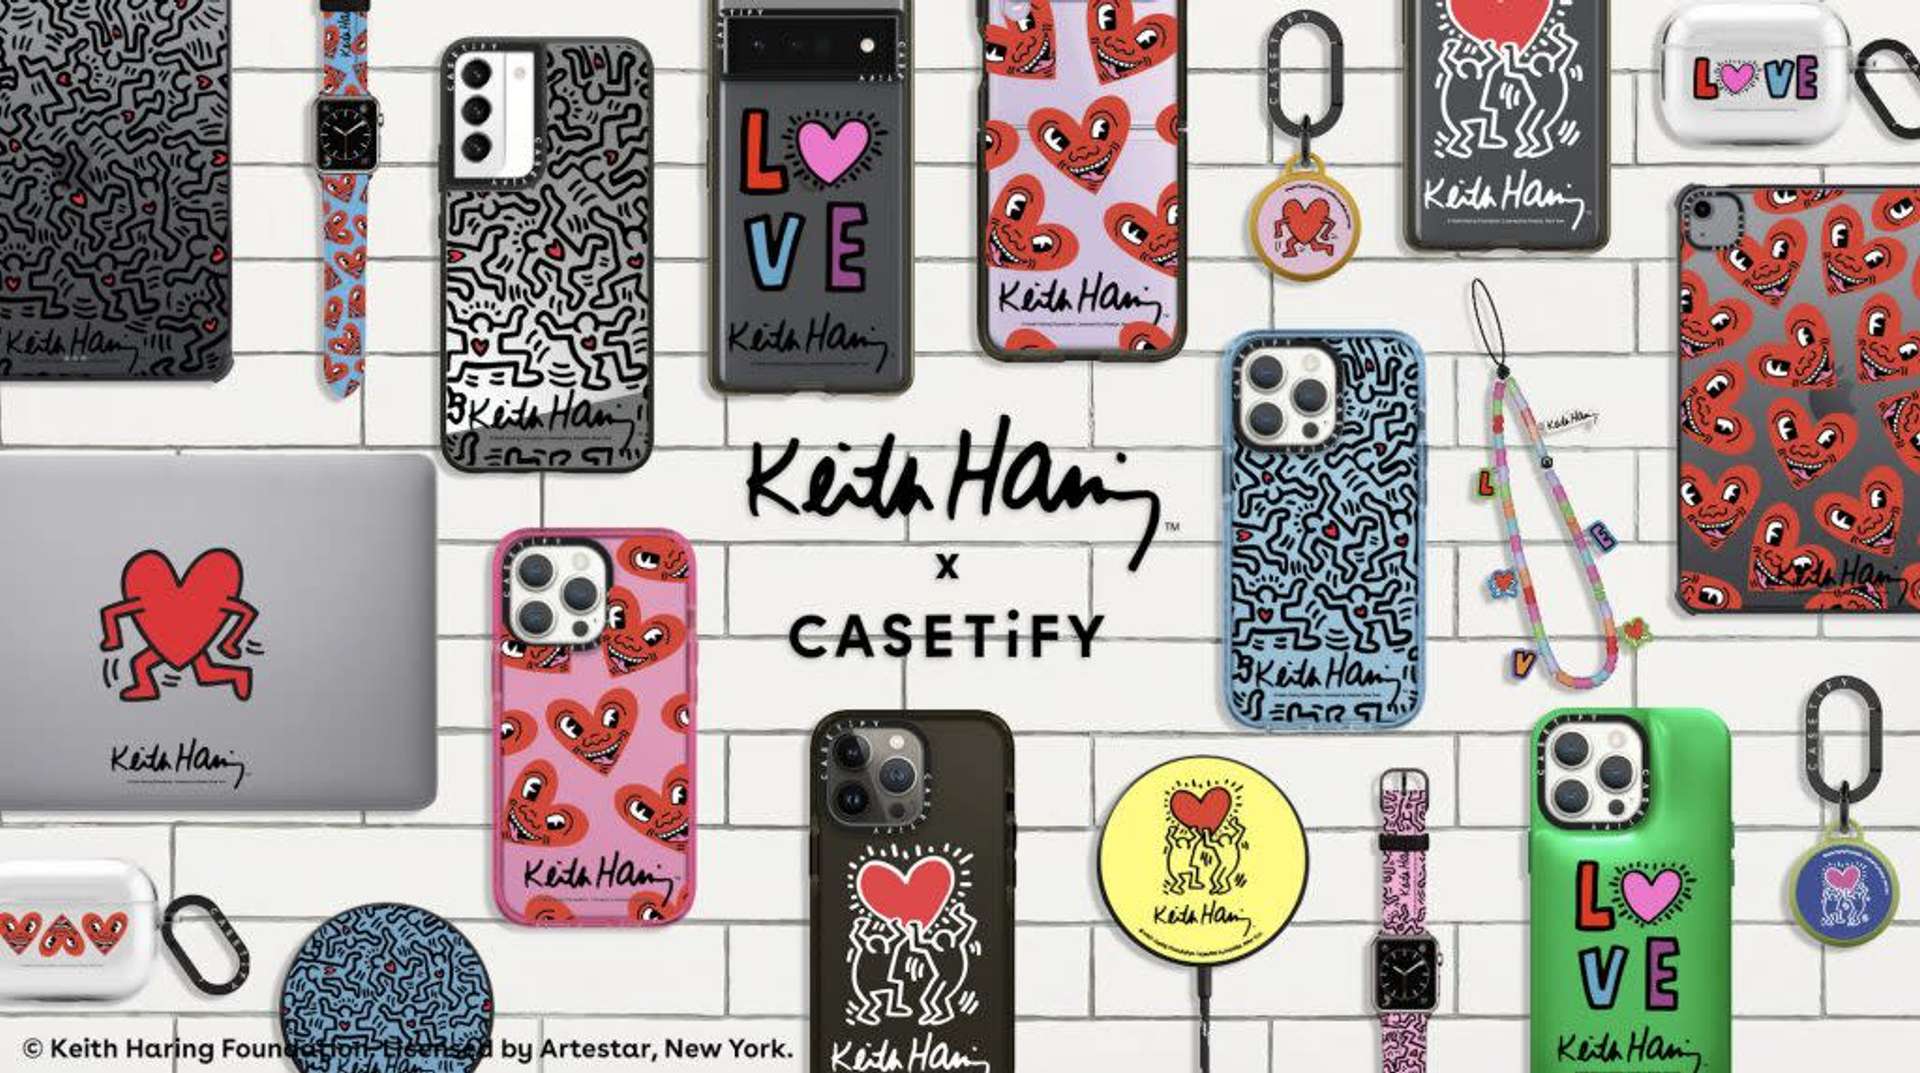 A collage of several items from Casetify’s collaboration with artist Keith Haring, including phone covers, stickers, wireless chargers, and headphone protectors